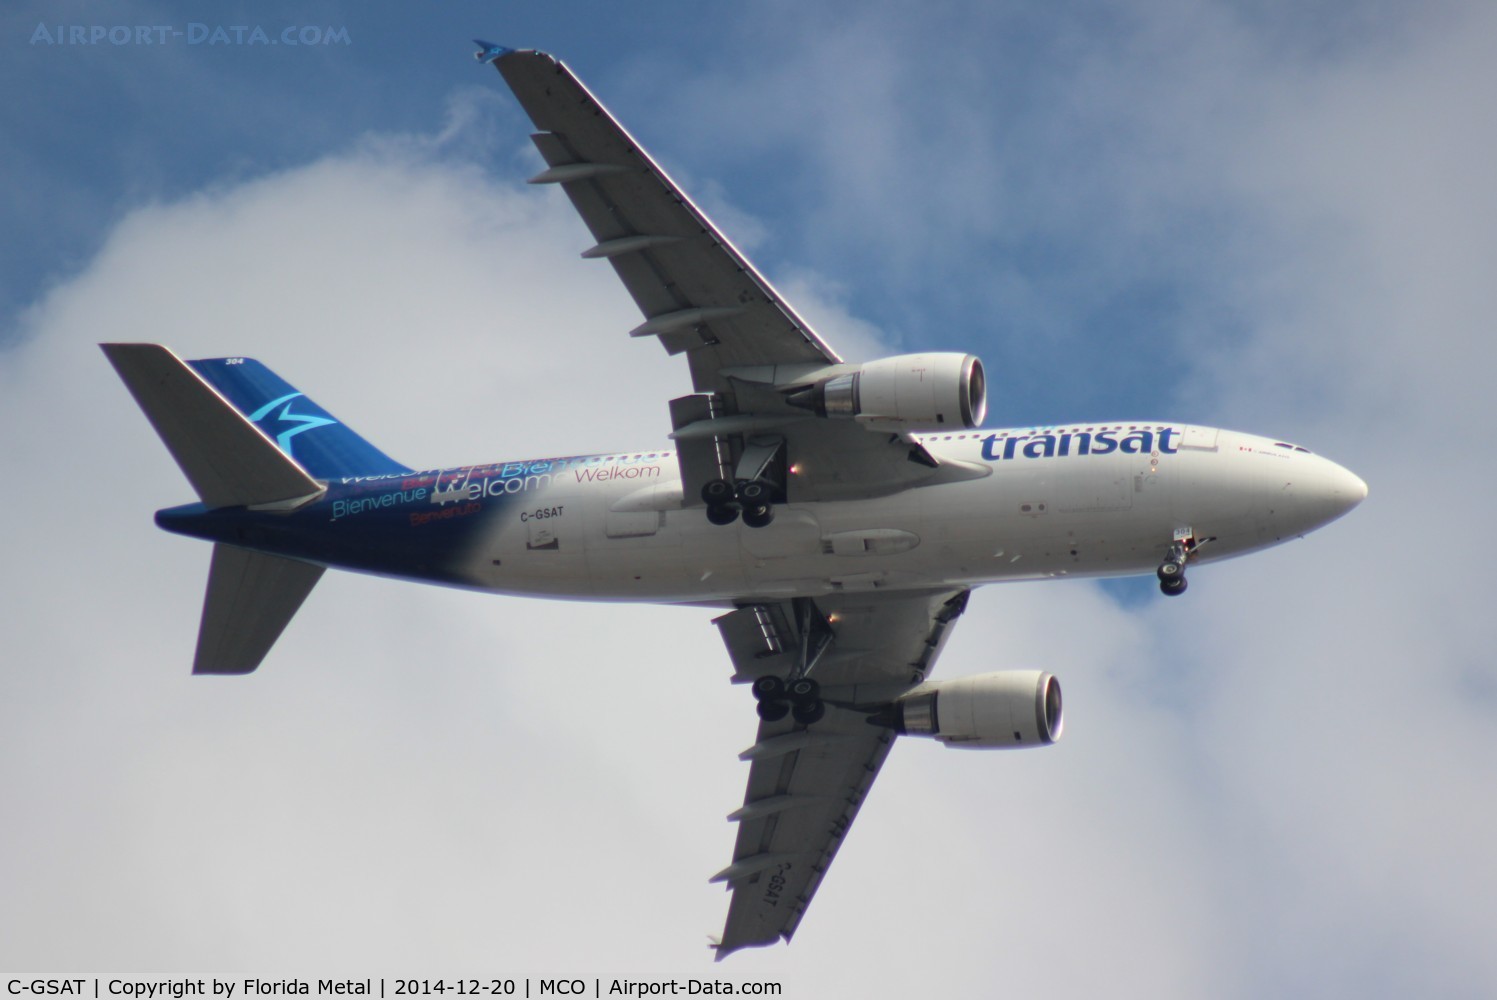 C-GSAT, 1991 Airbus A310-308 C/N 600, Air Transat with one engine out flying from HAV-YUL had to divert to MCO, flying over ORL